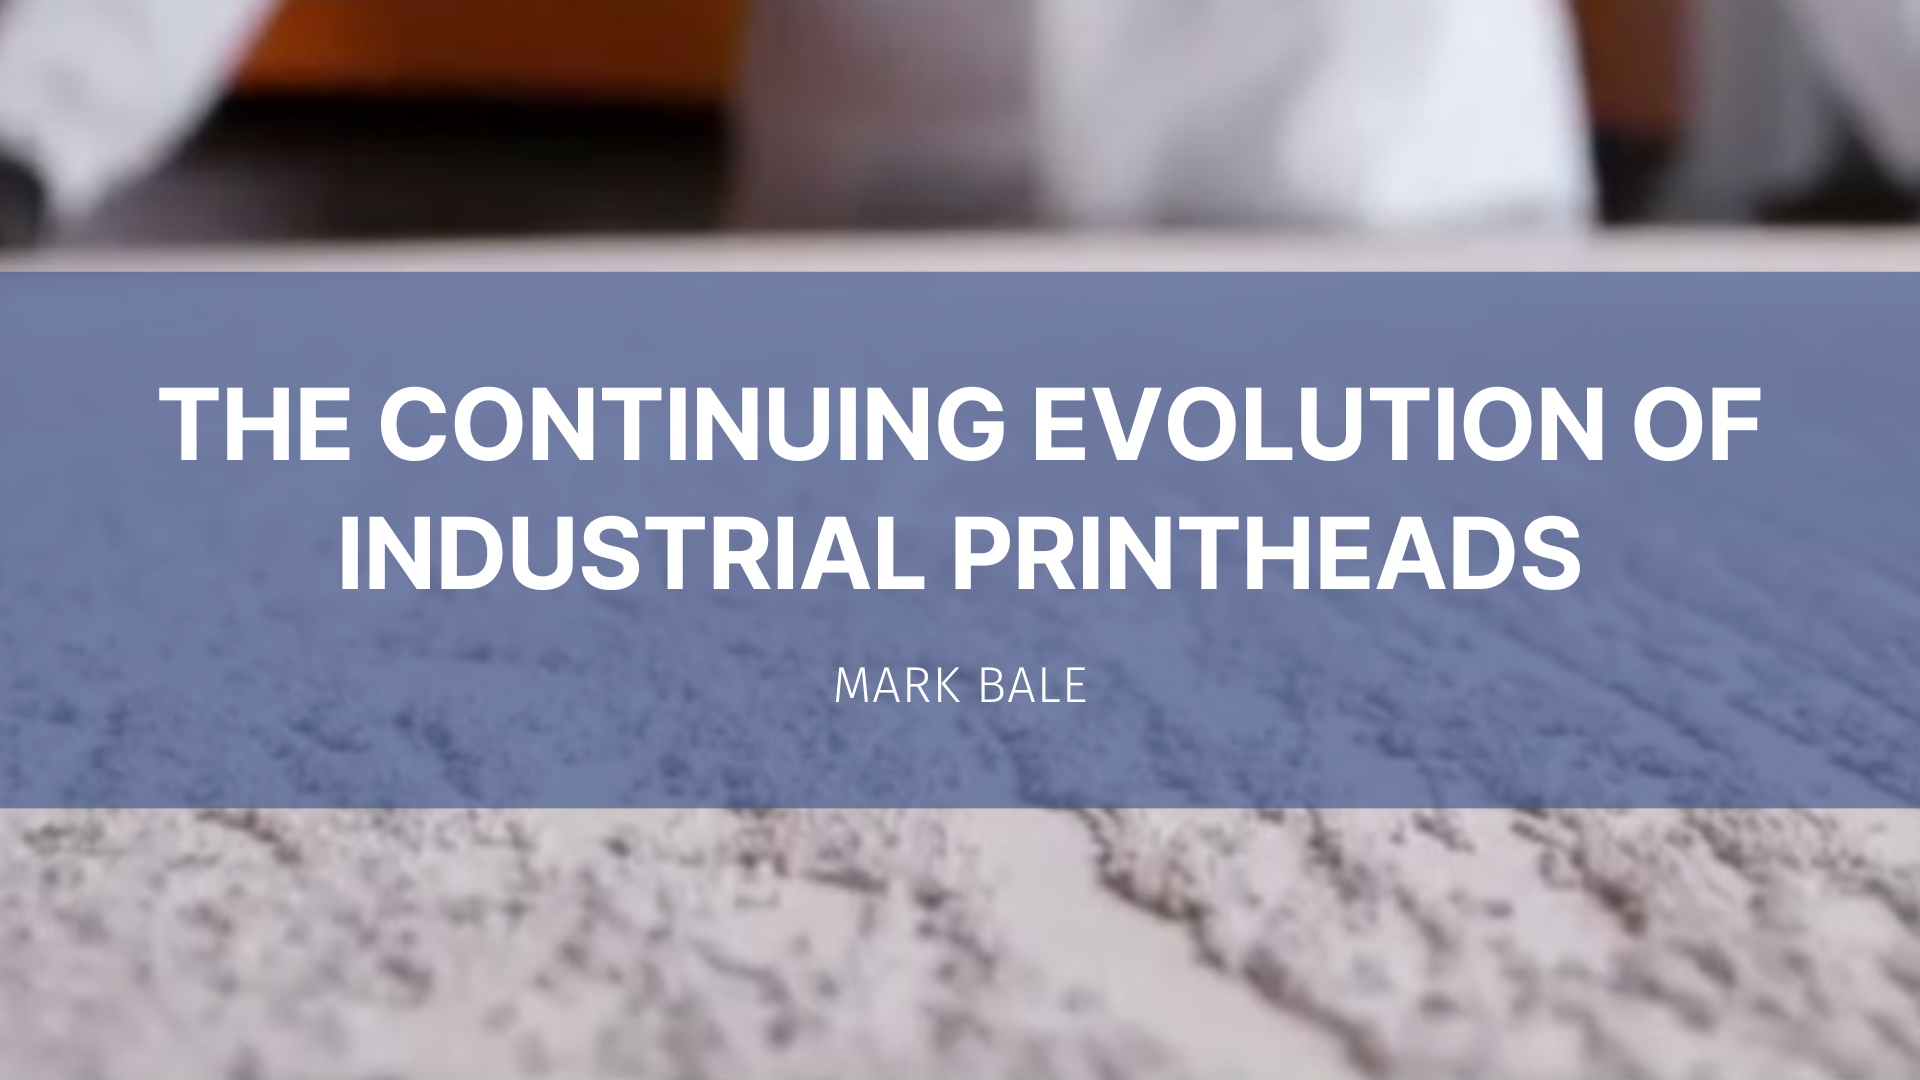 Featured image for “The Continuing Evolution of Industrial Printheads”